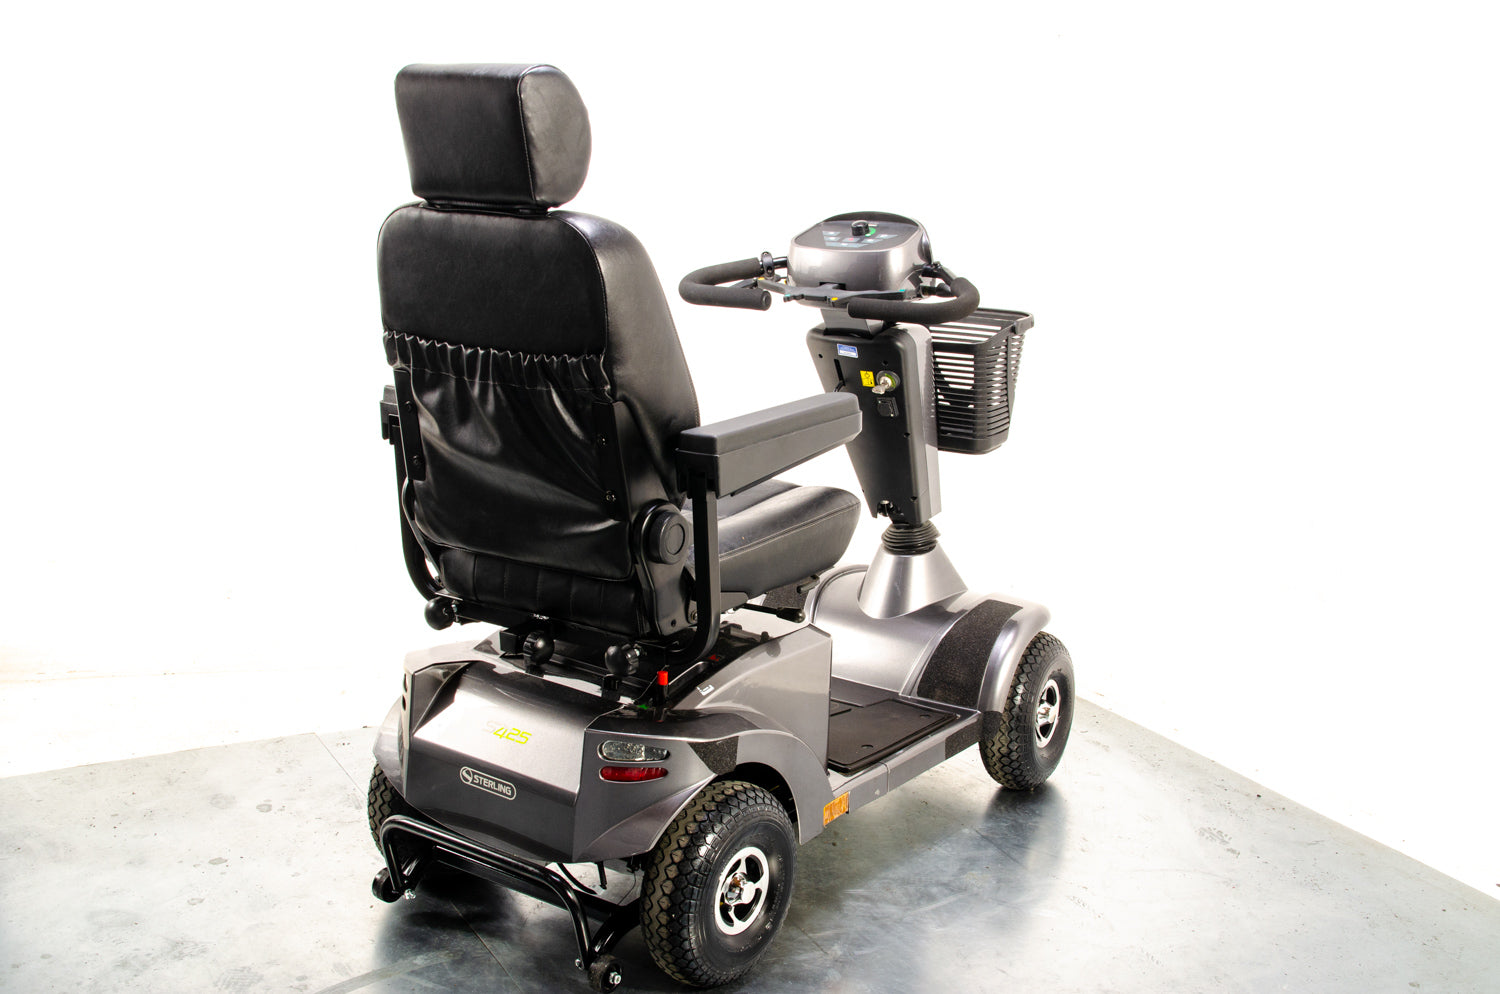 New Sterling S425 Mobility Scooter All-Terrain 8mph Midsize Pneumatic Pavement 13553